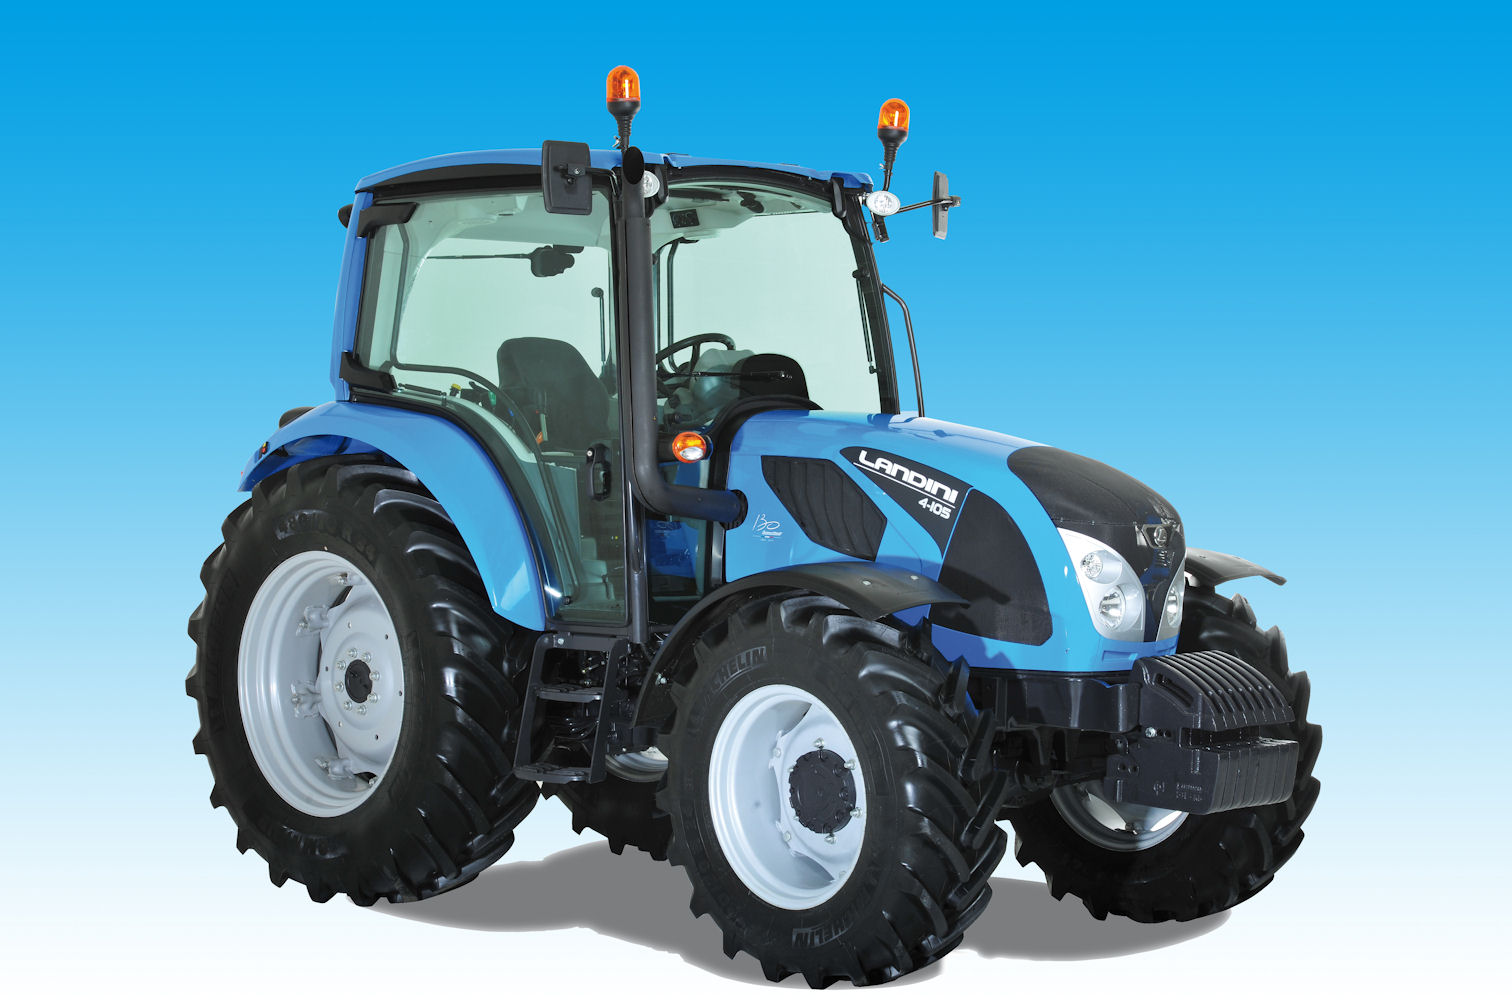 Landini 4 Series tractor is an all-new design primarily for the livestock sector with power outputs from 90-107hp using a compact four-cylinder engine.